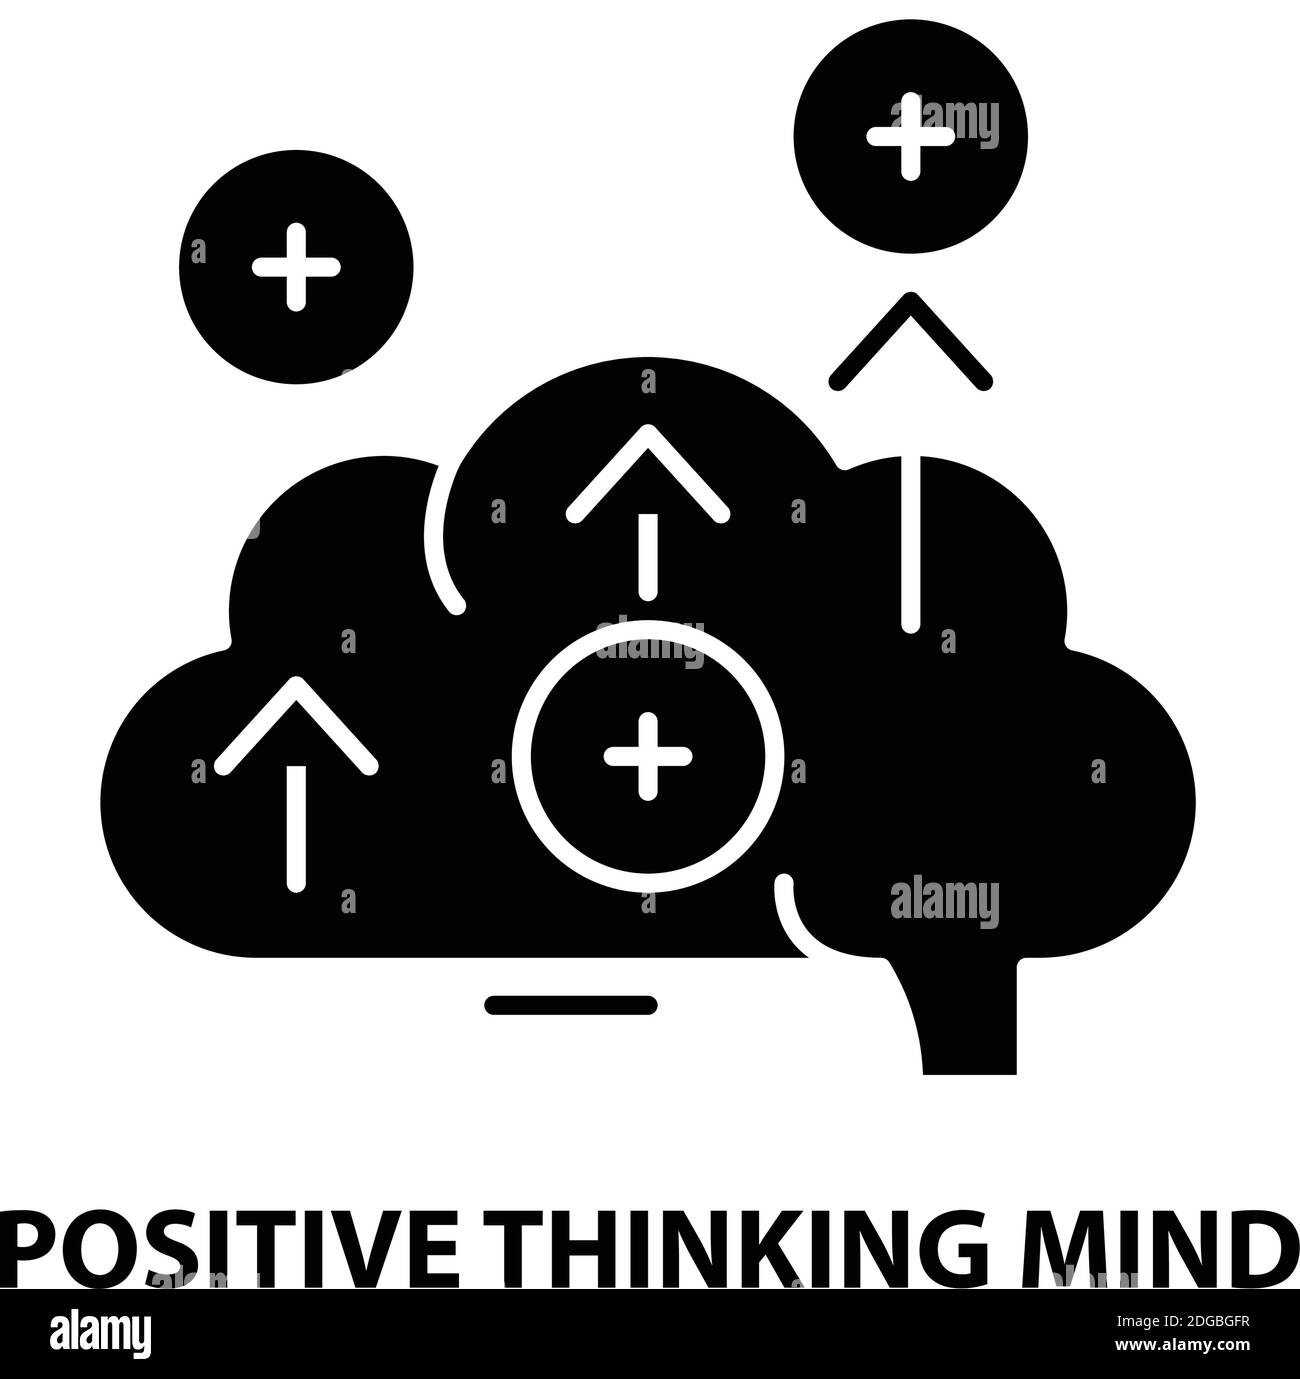 positive thinking mind icon, black vector sign with editable strokes, concept illustration Stock Vector